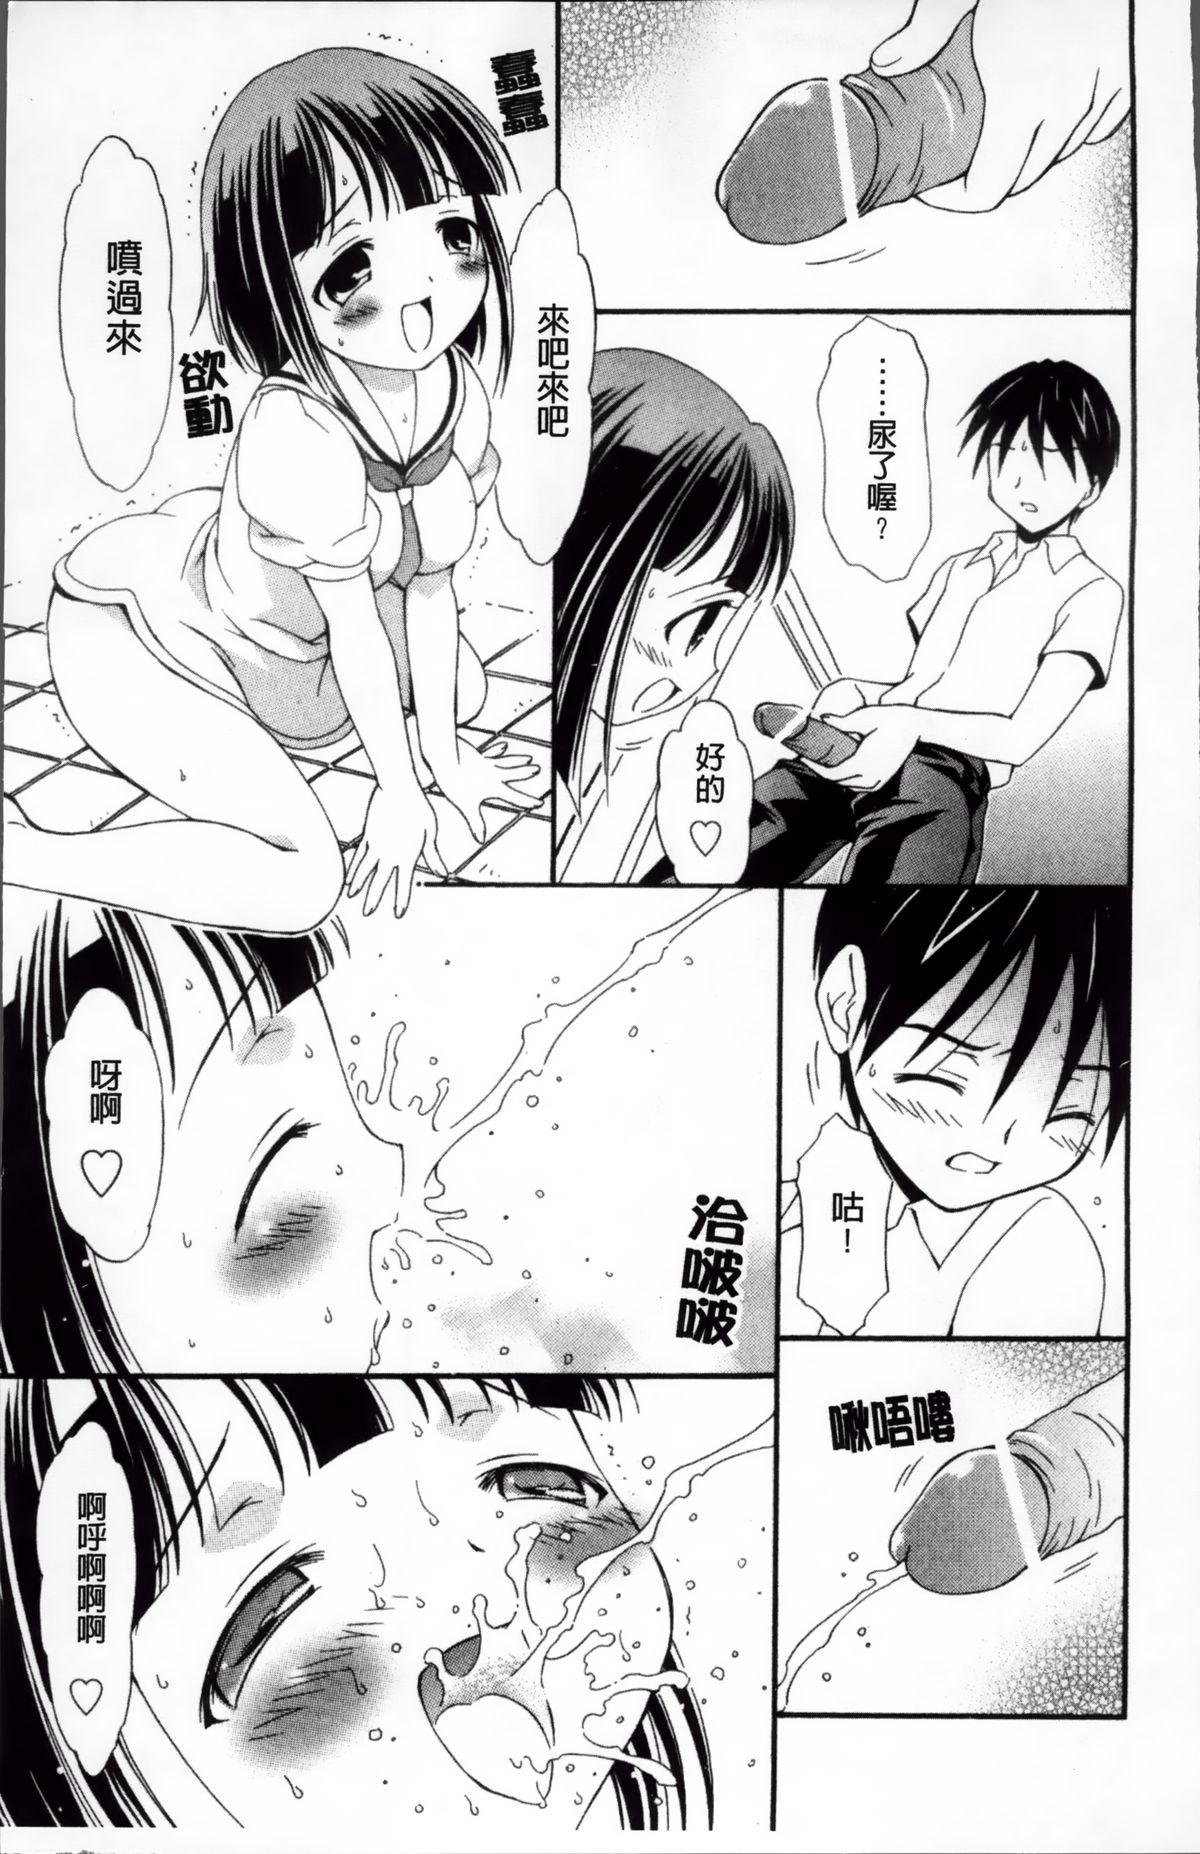 Best Blow Job Ever Melty Peach Phenomenon | 鮮嫩蜜桃的溶化現象 Girl Gets Fucked - Page 13